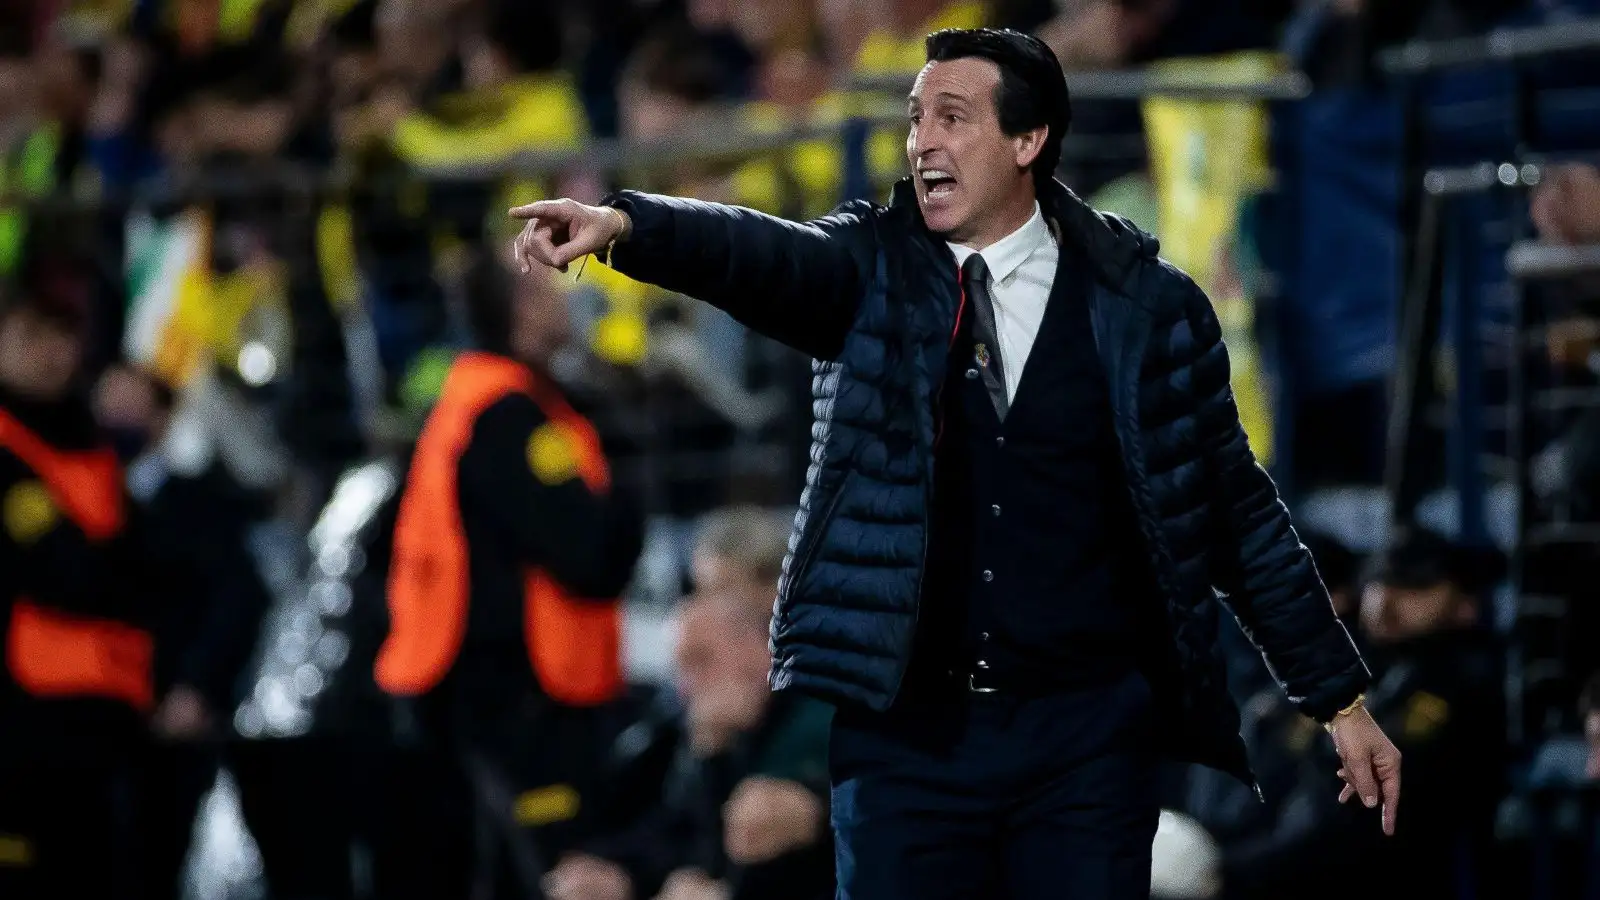 Unai Emery shouts instructions during a match against Liverpool